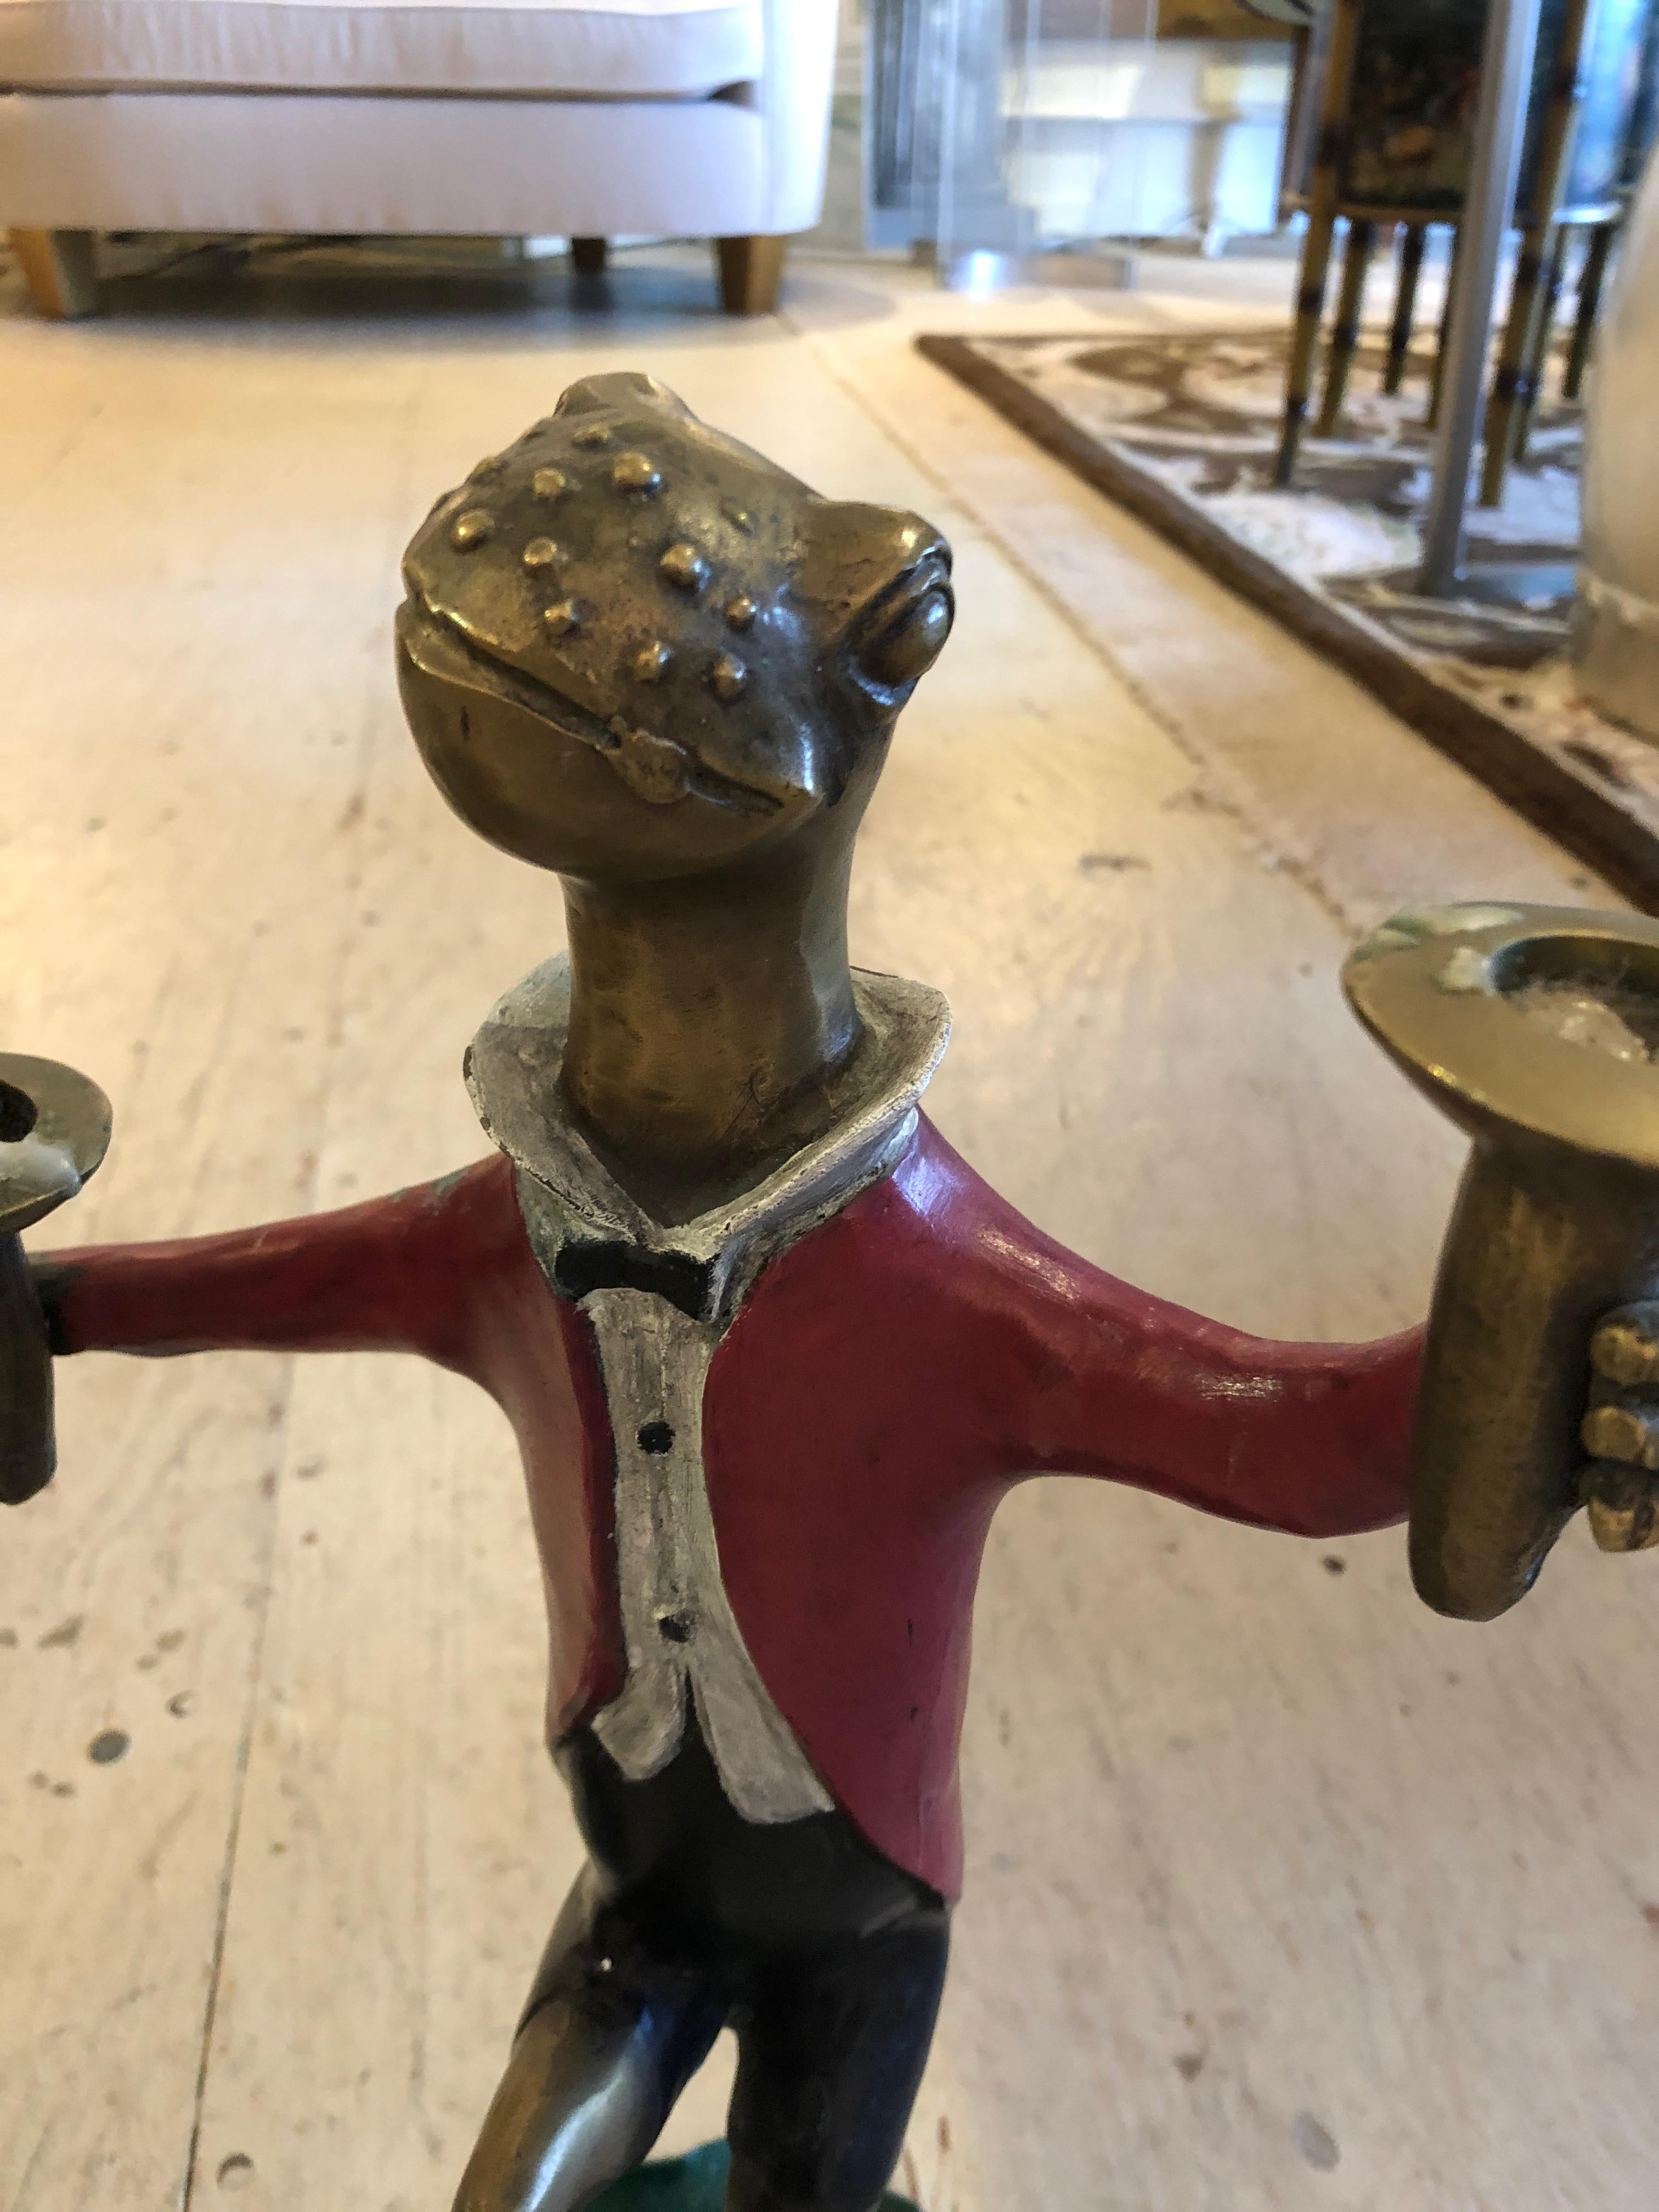 Charming pair of painted bronze candlesticks, one is a dapper Mr. dancing frog in red jacket, and his partner is a tutu'd frogette, equally jovial.